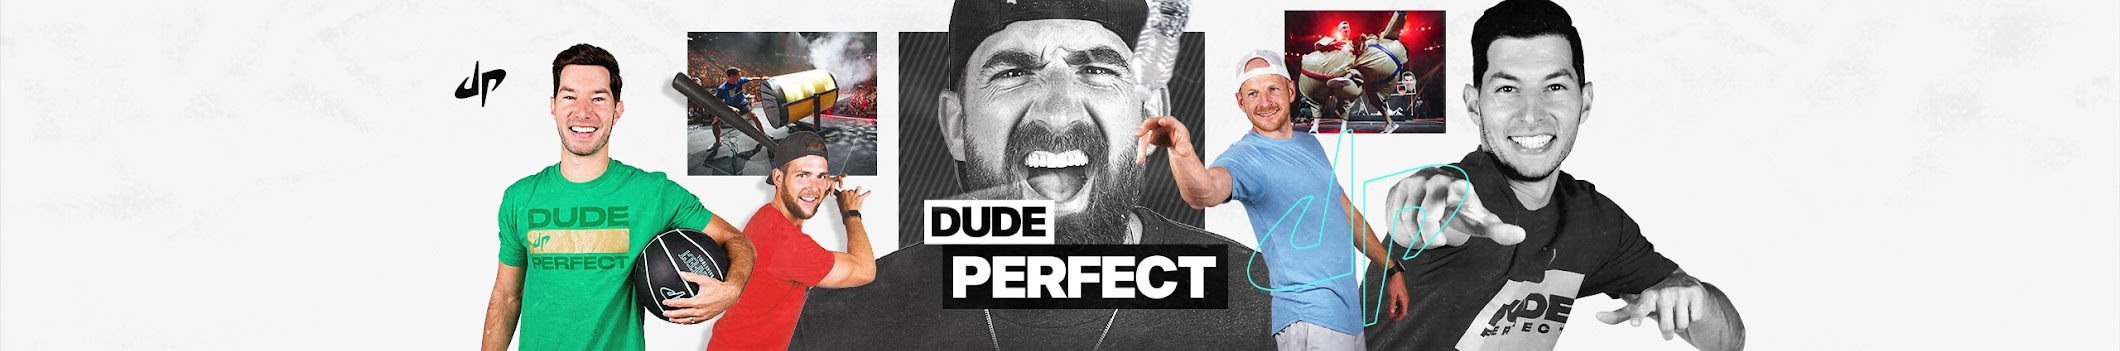 dude-perfect-banner